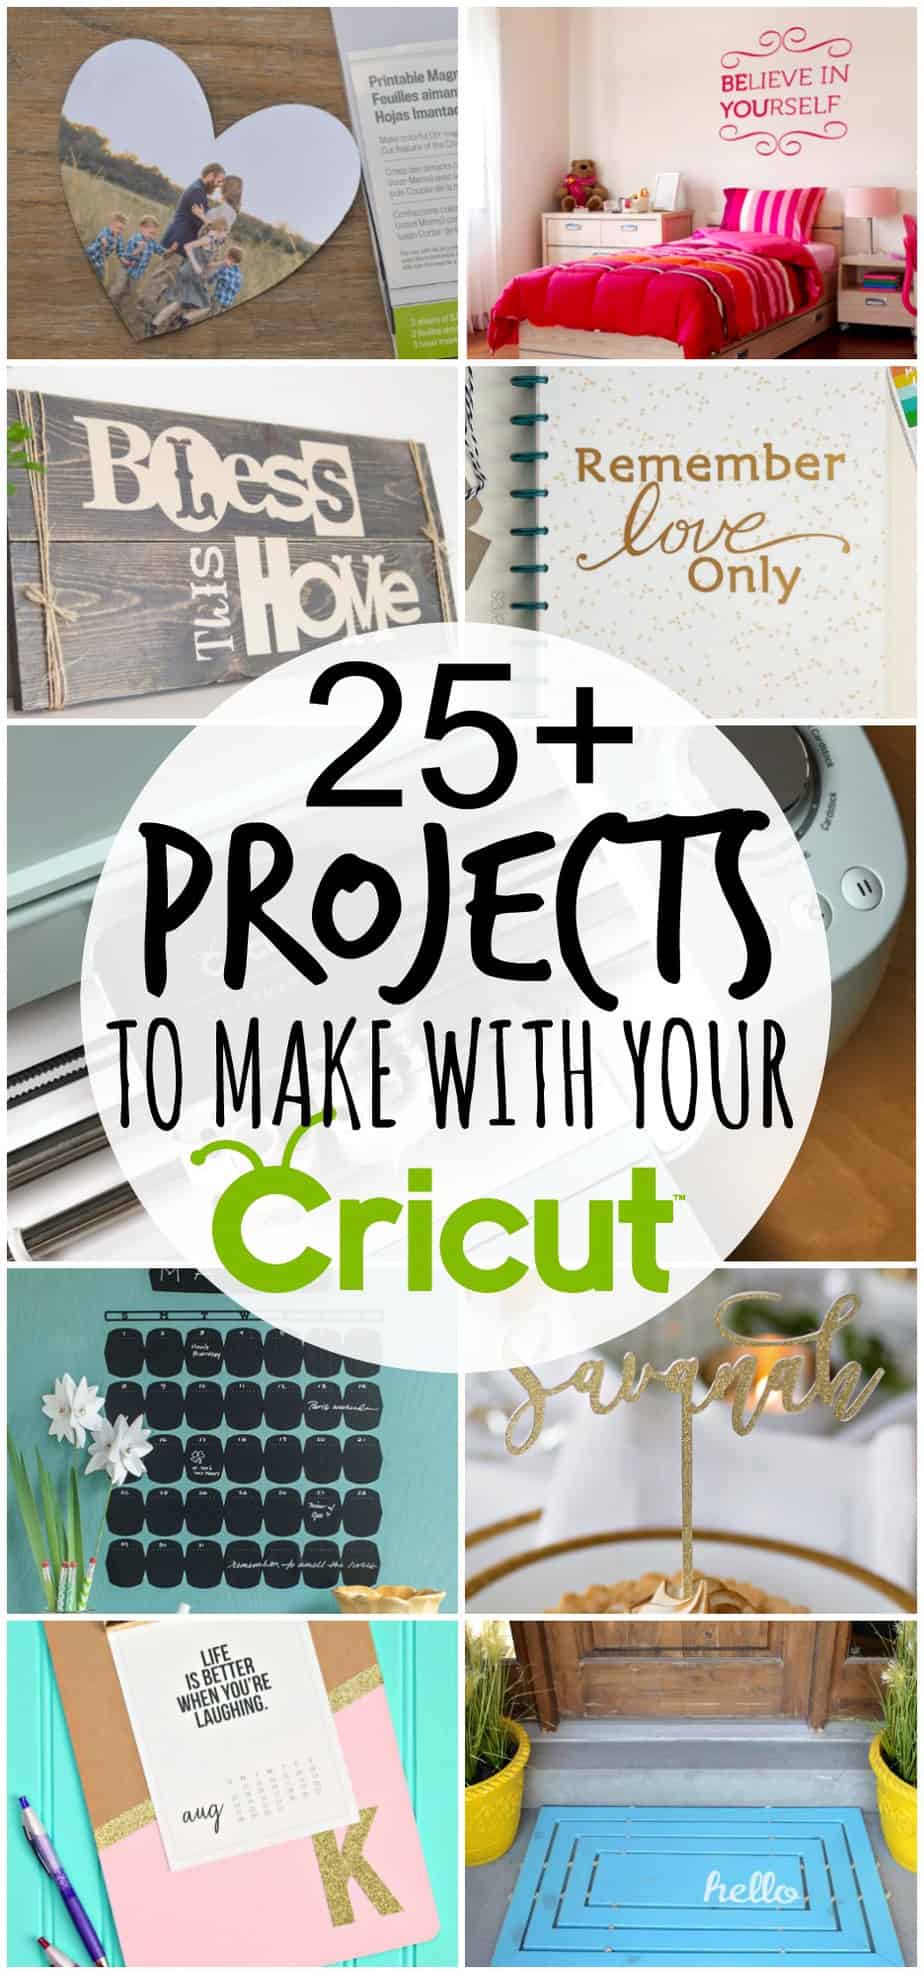 What Can I Make with My Cricut Explore Air 2?